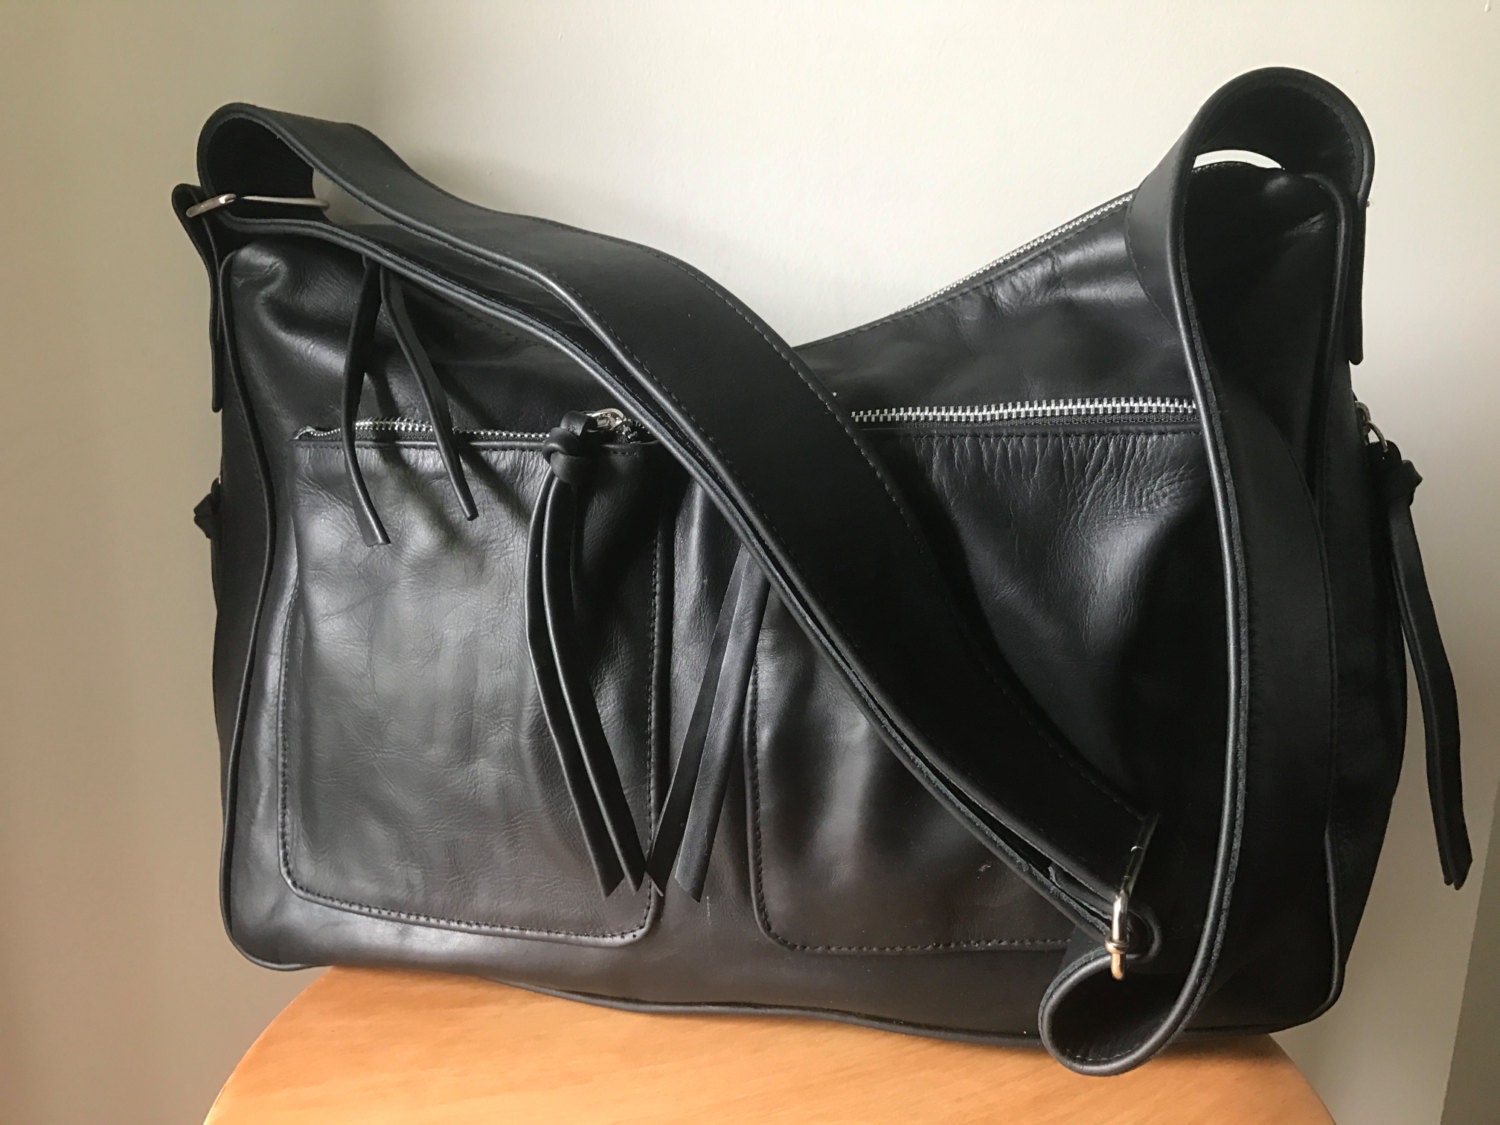 Curved hobo style handmade leather bag.Extra wide crossbody